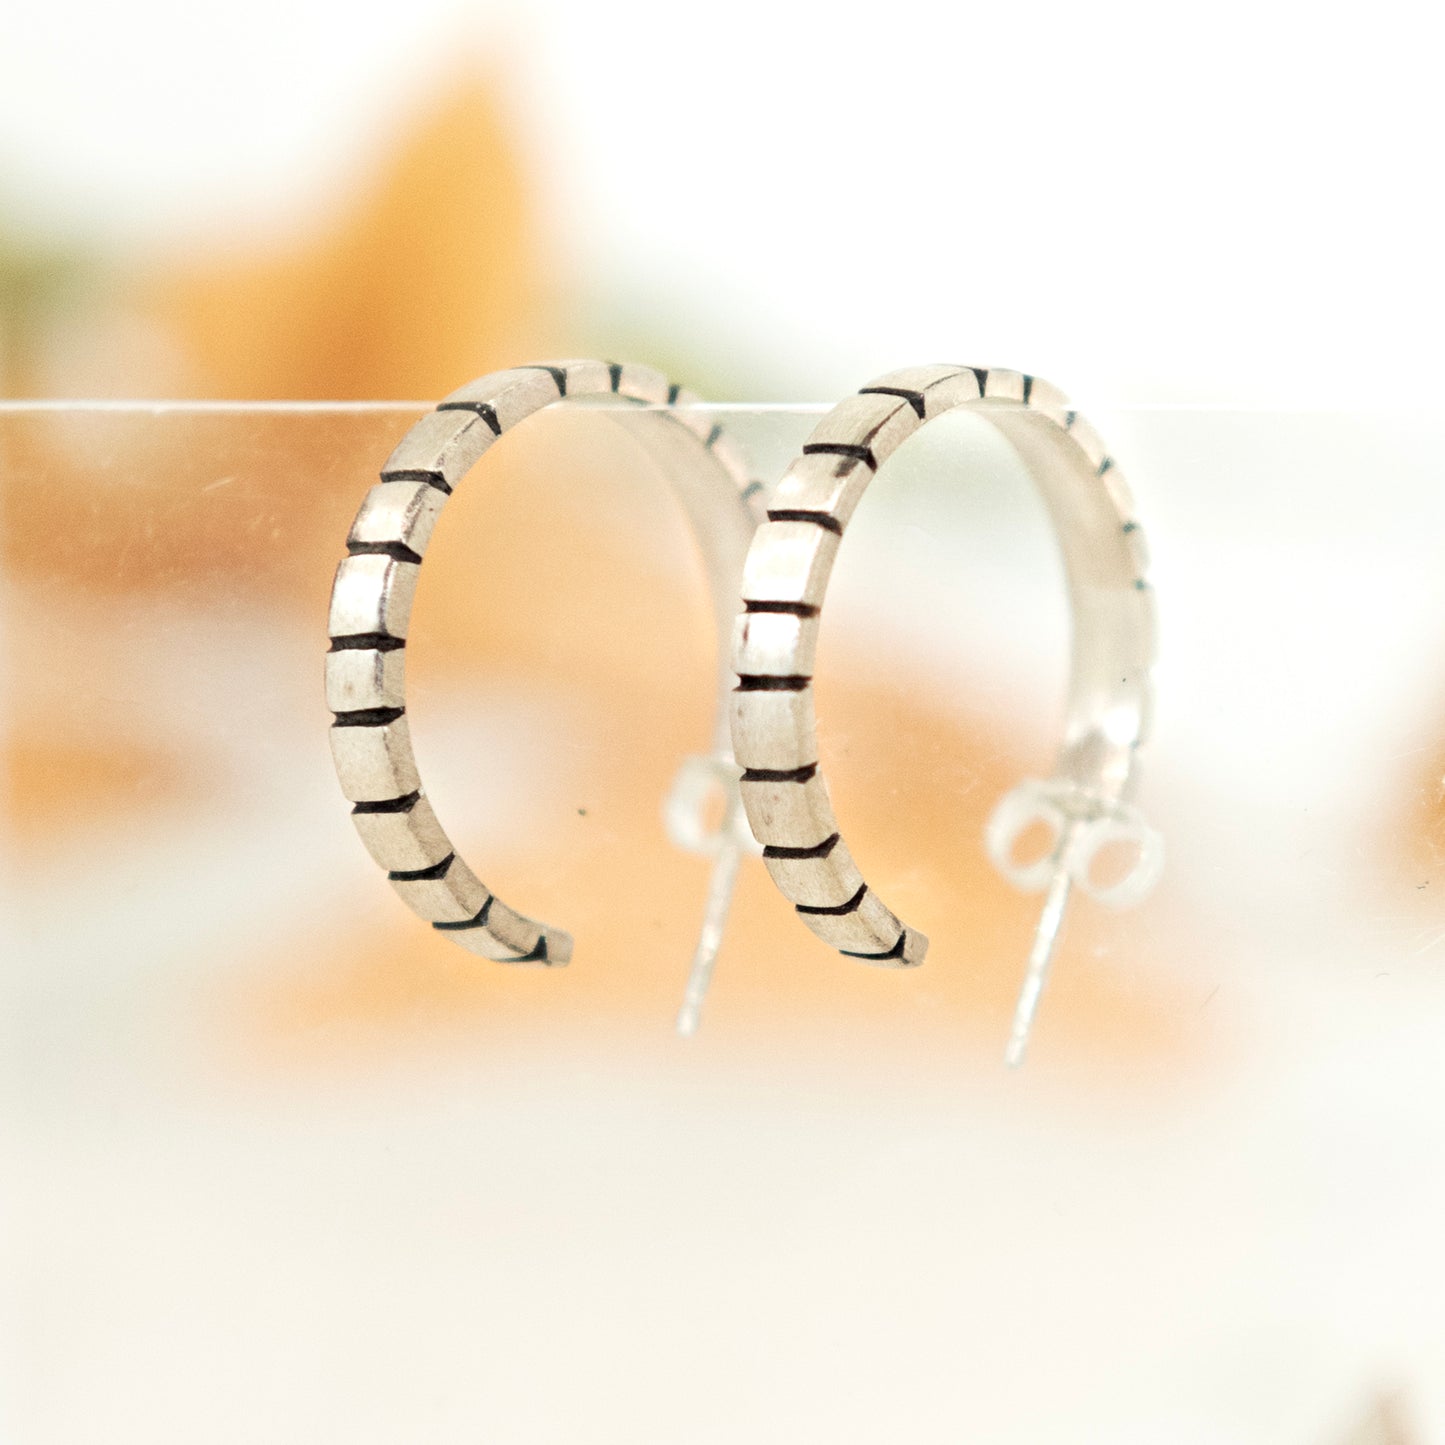 Andrea Mueller, Stacked Square Hoops